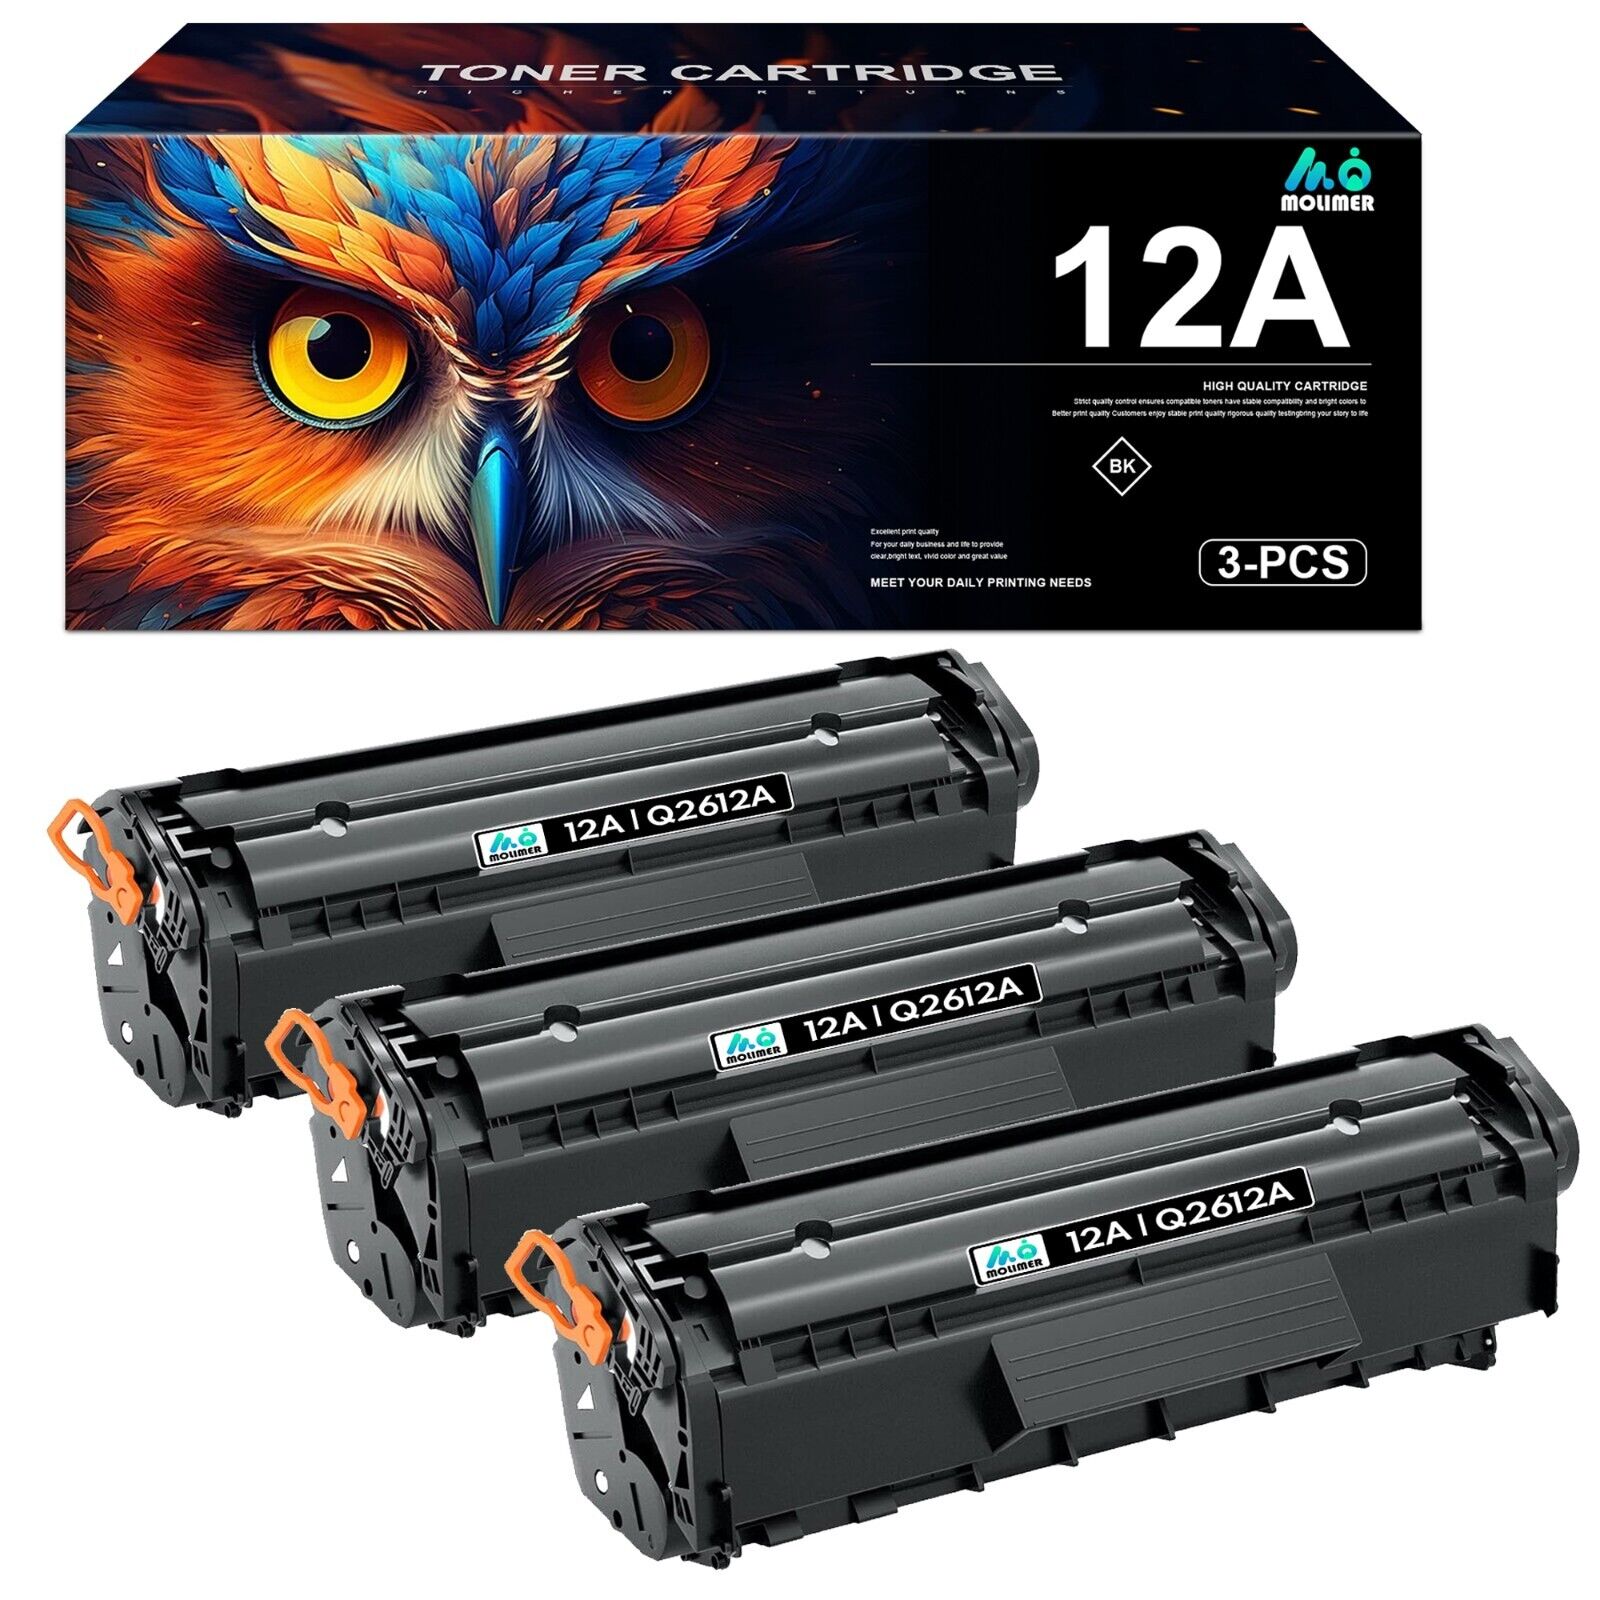 Toner Cartridge 12A | Q2612A High Yield Replacement for HP 1010 1012 1015 M1005